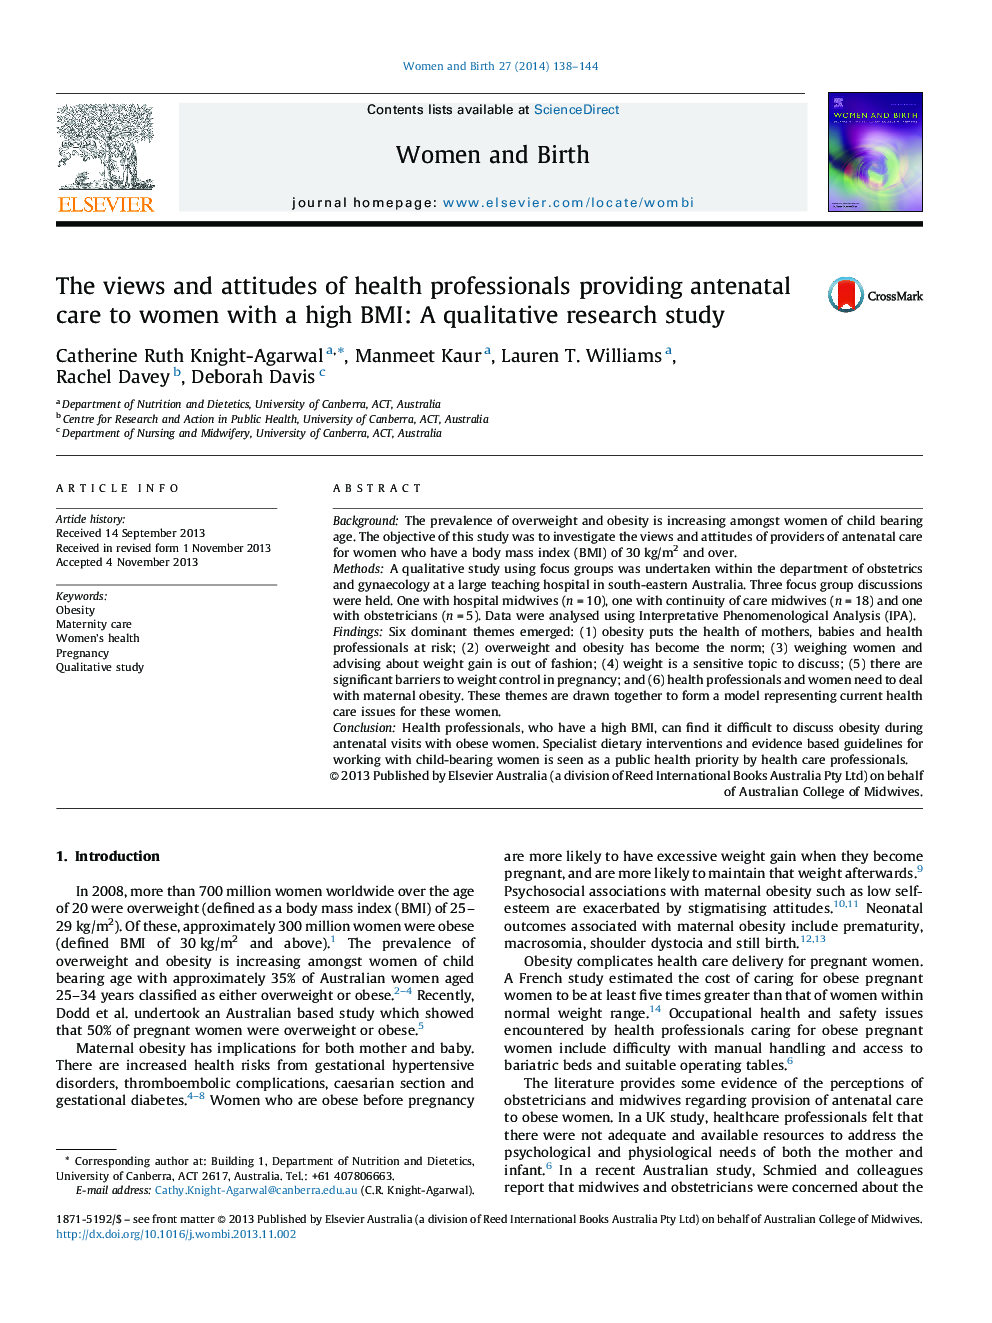 The views and attitudes of health professionals providing antenatal care to women with a high BMI: A qualitative research study